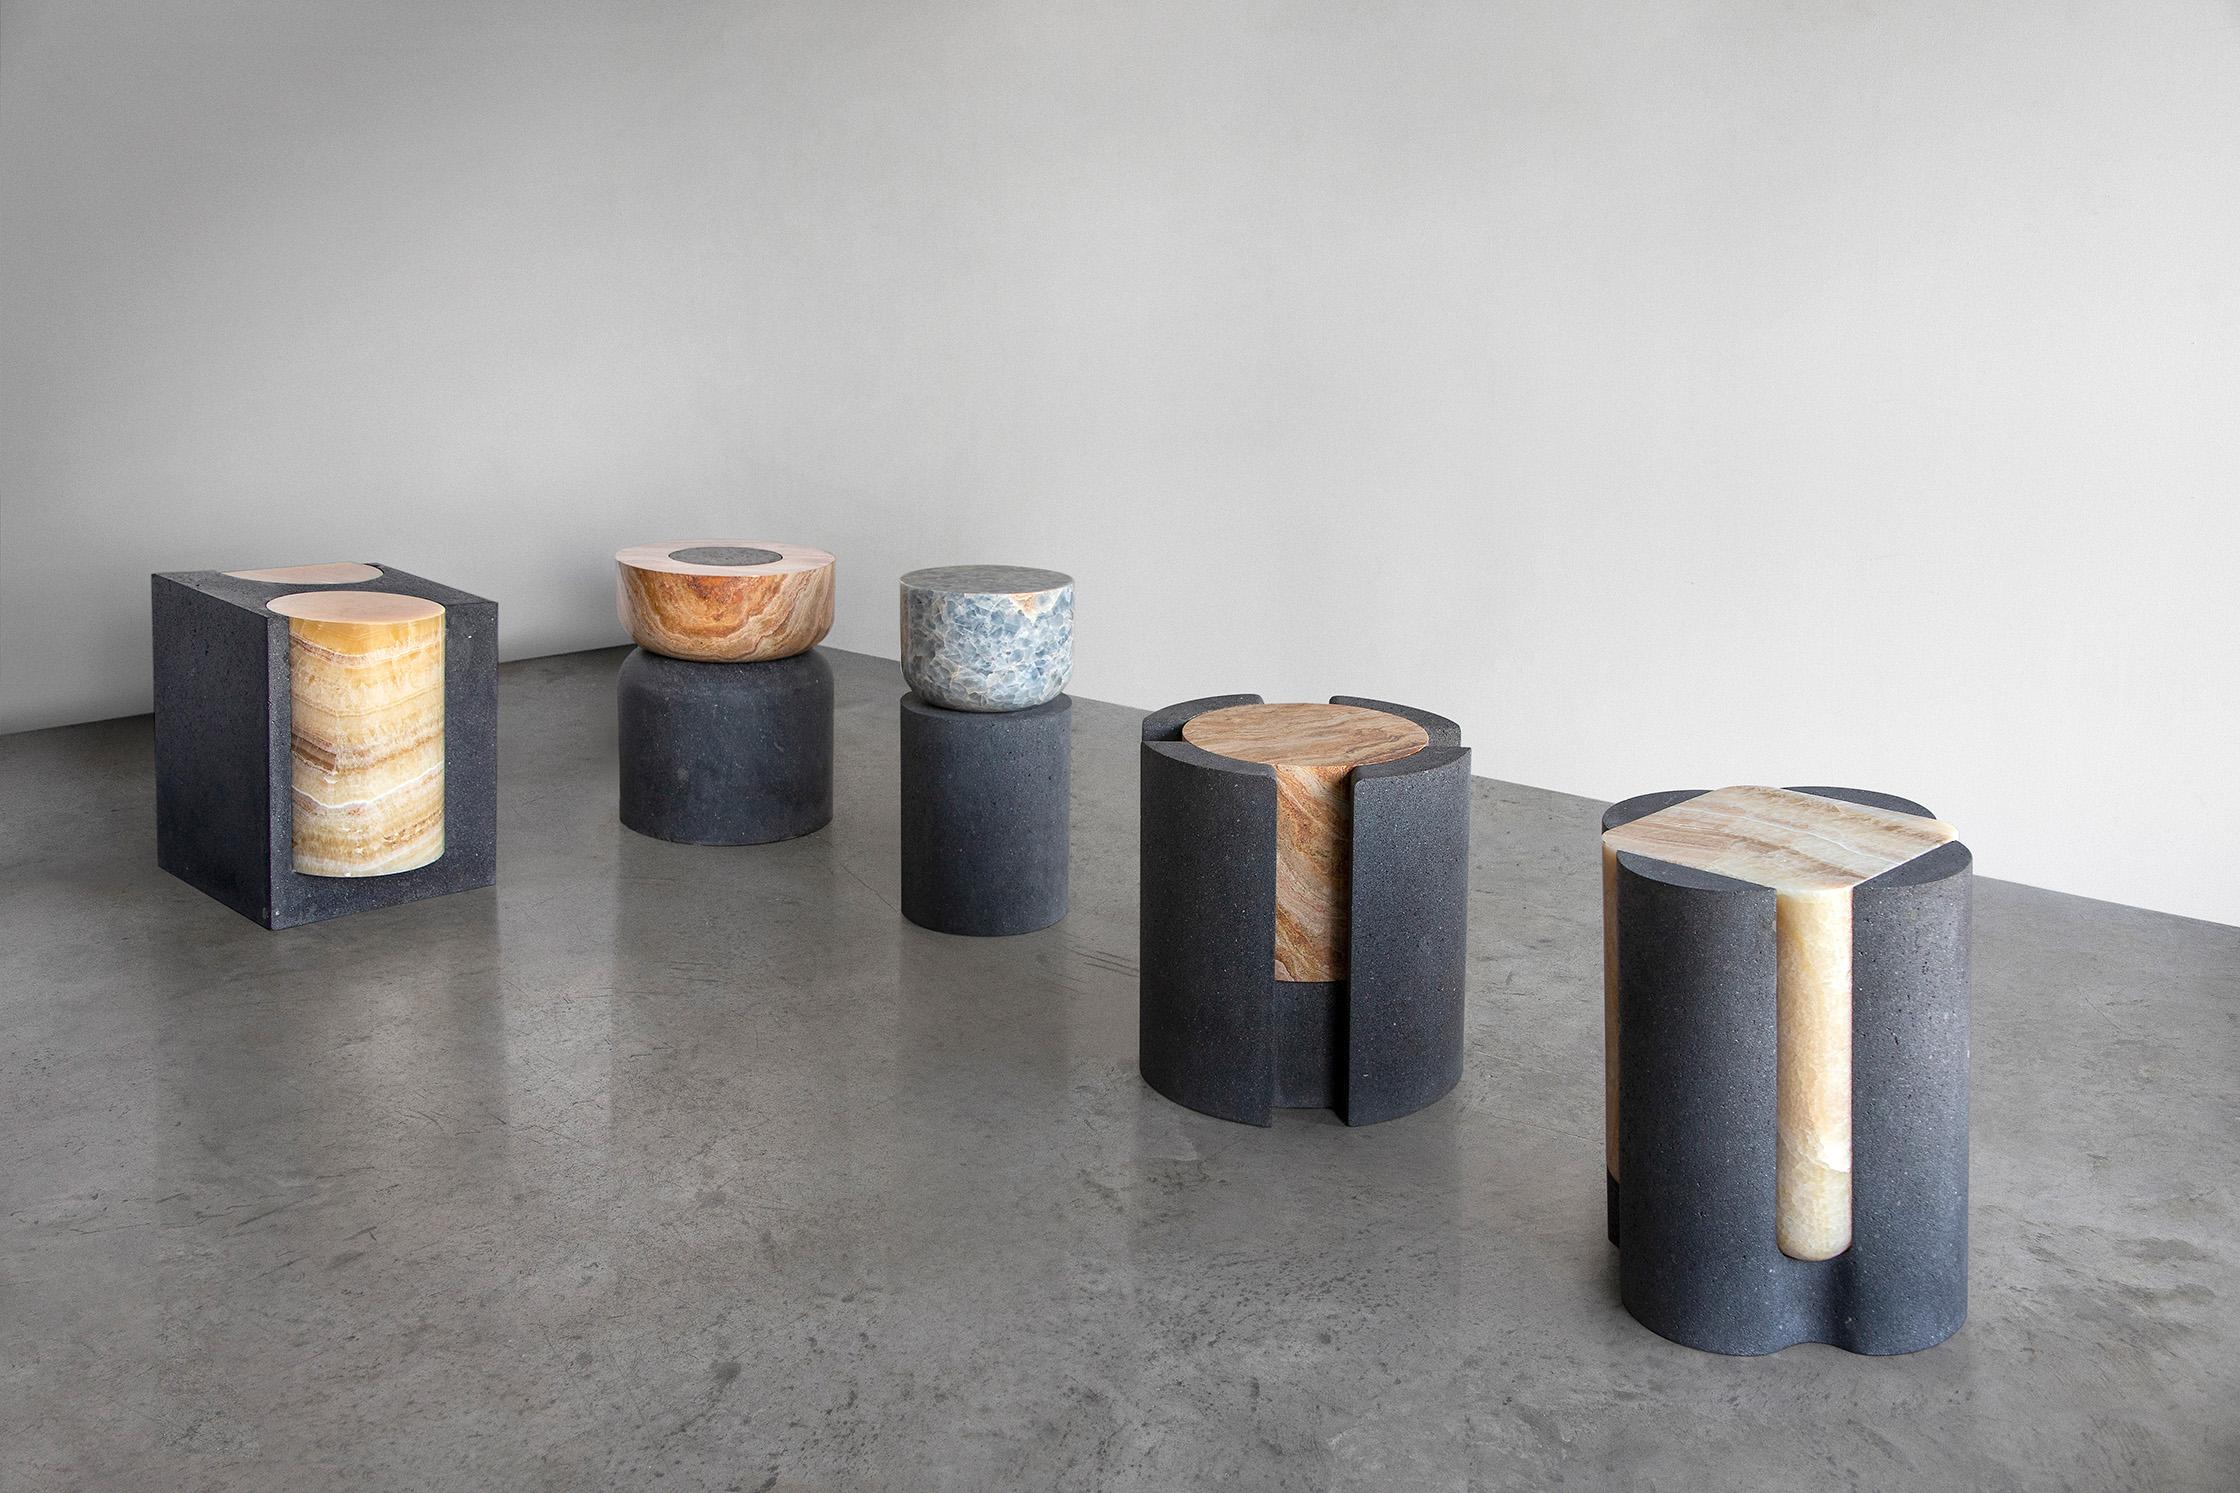 Mexican Volcanic Shade IV Stool/Table by Sten Studio, Represented by Tuleste Factory For Sale